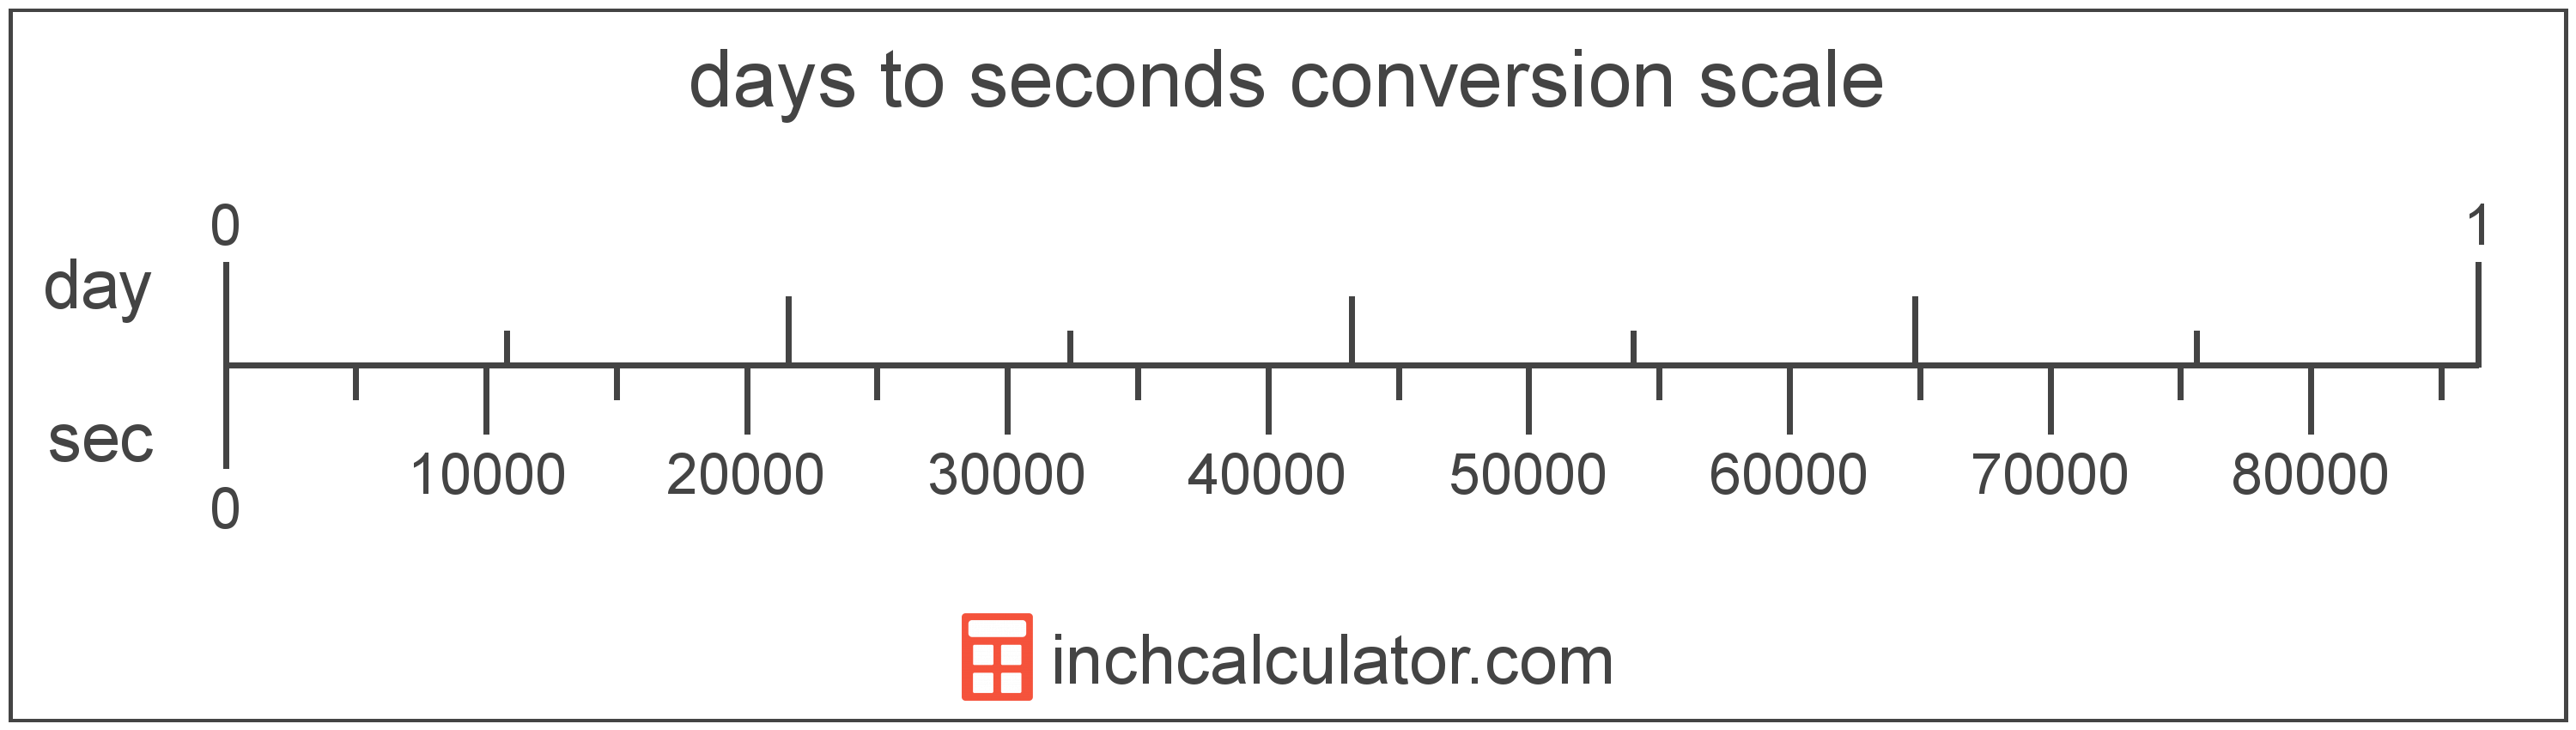 days-to-seconds-conversion-day-to-sec-inch-calculator